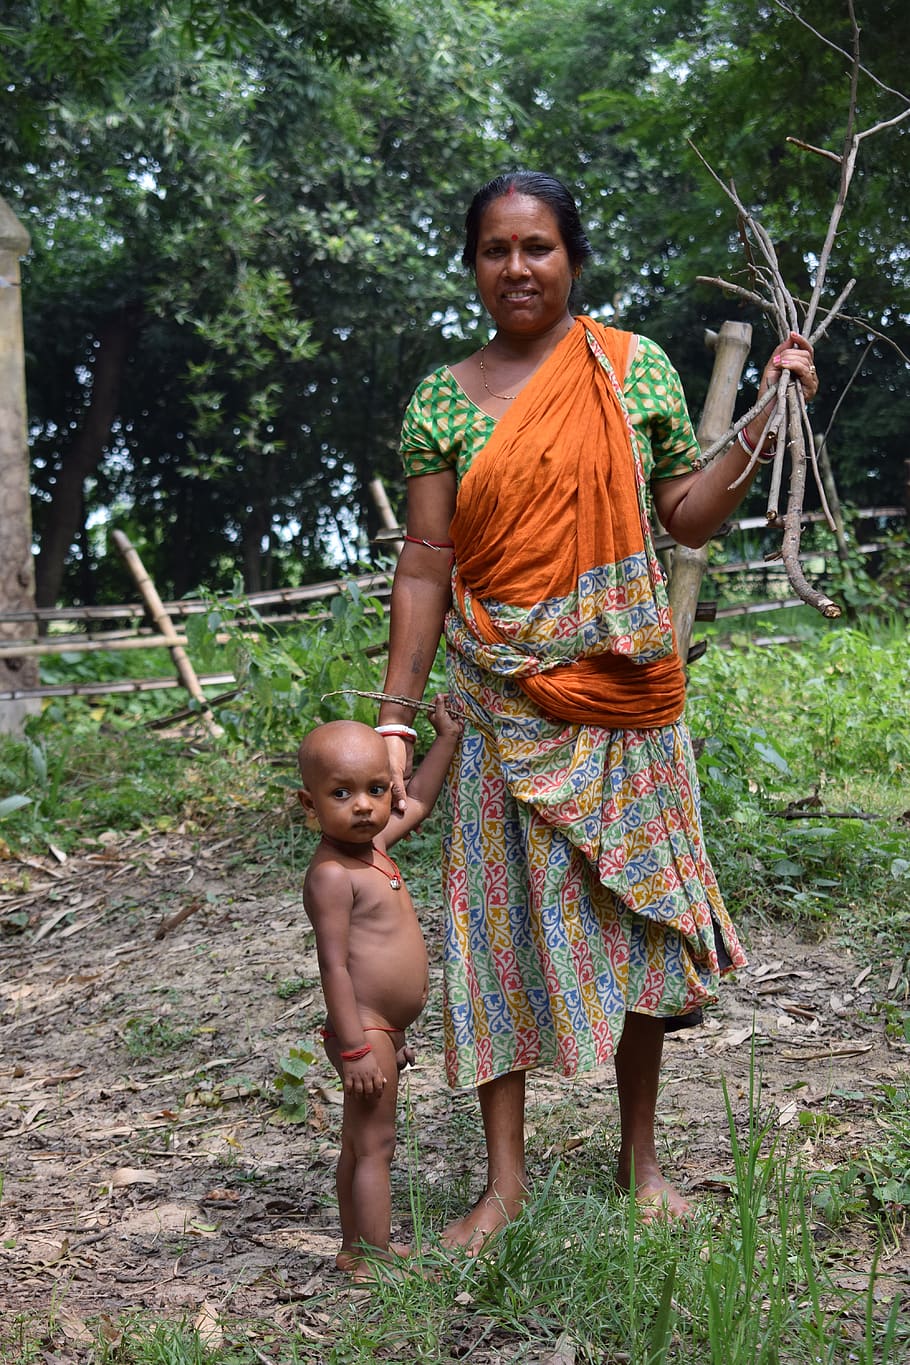 mother, child, bonding, west bengal, indian, poor, india, looking at camera, childhood, full length